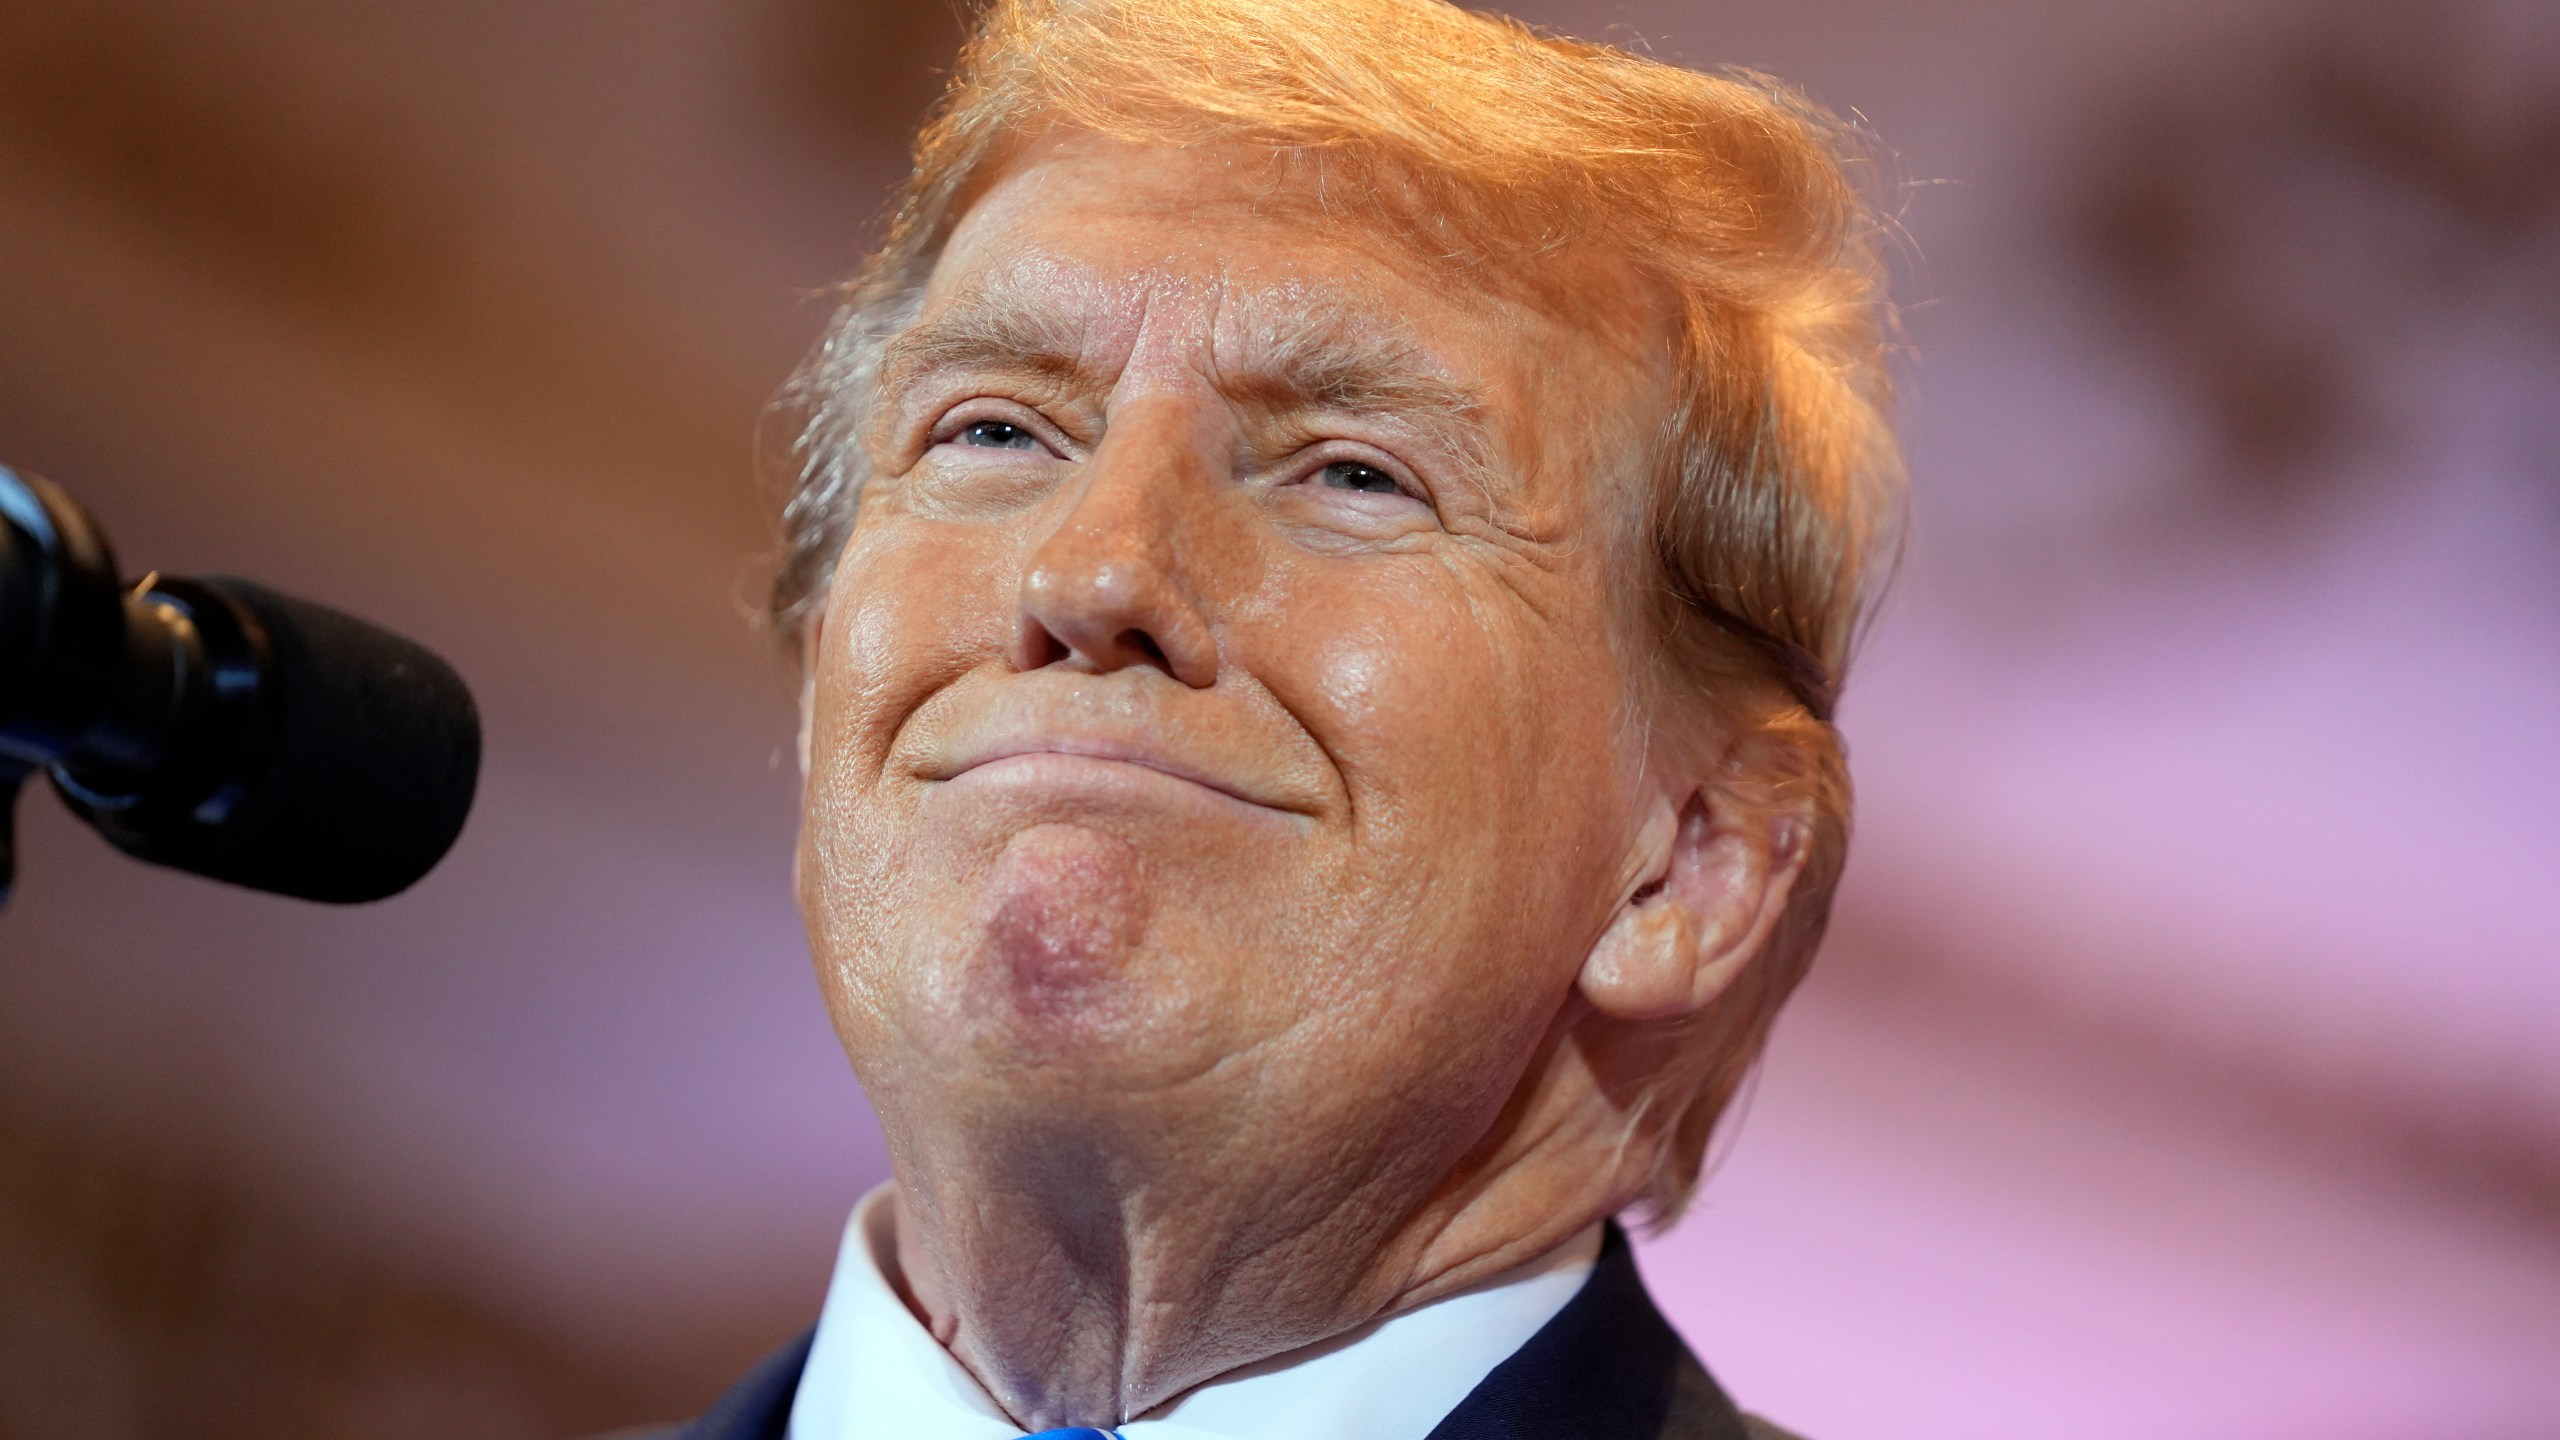 Republican presidential candidate former President Donald Trump speaks at a Super Tuesday election night party Tuesday, March 5, 2024, at Mar-a-Lago in Palm Beach, Fla. (AP Photo/Evan Vucci)